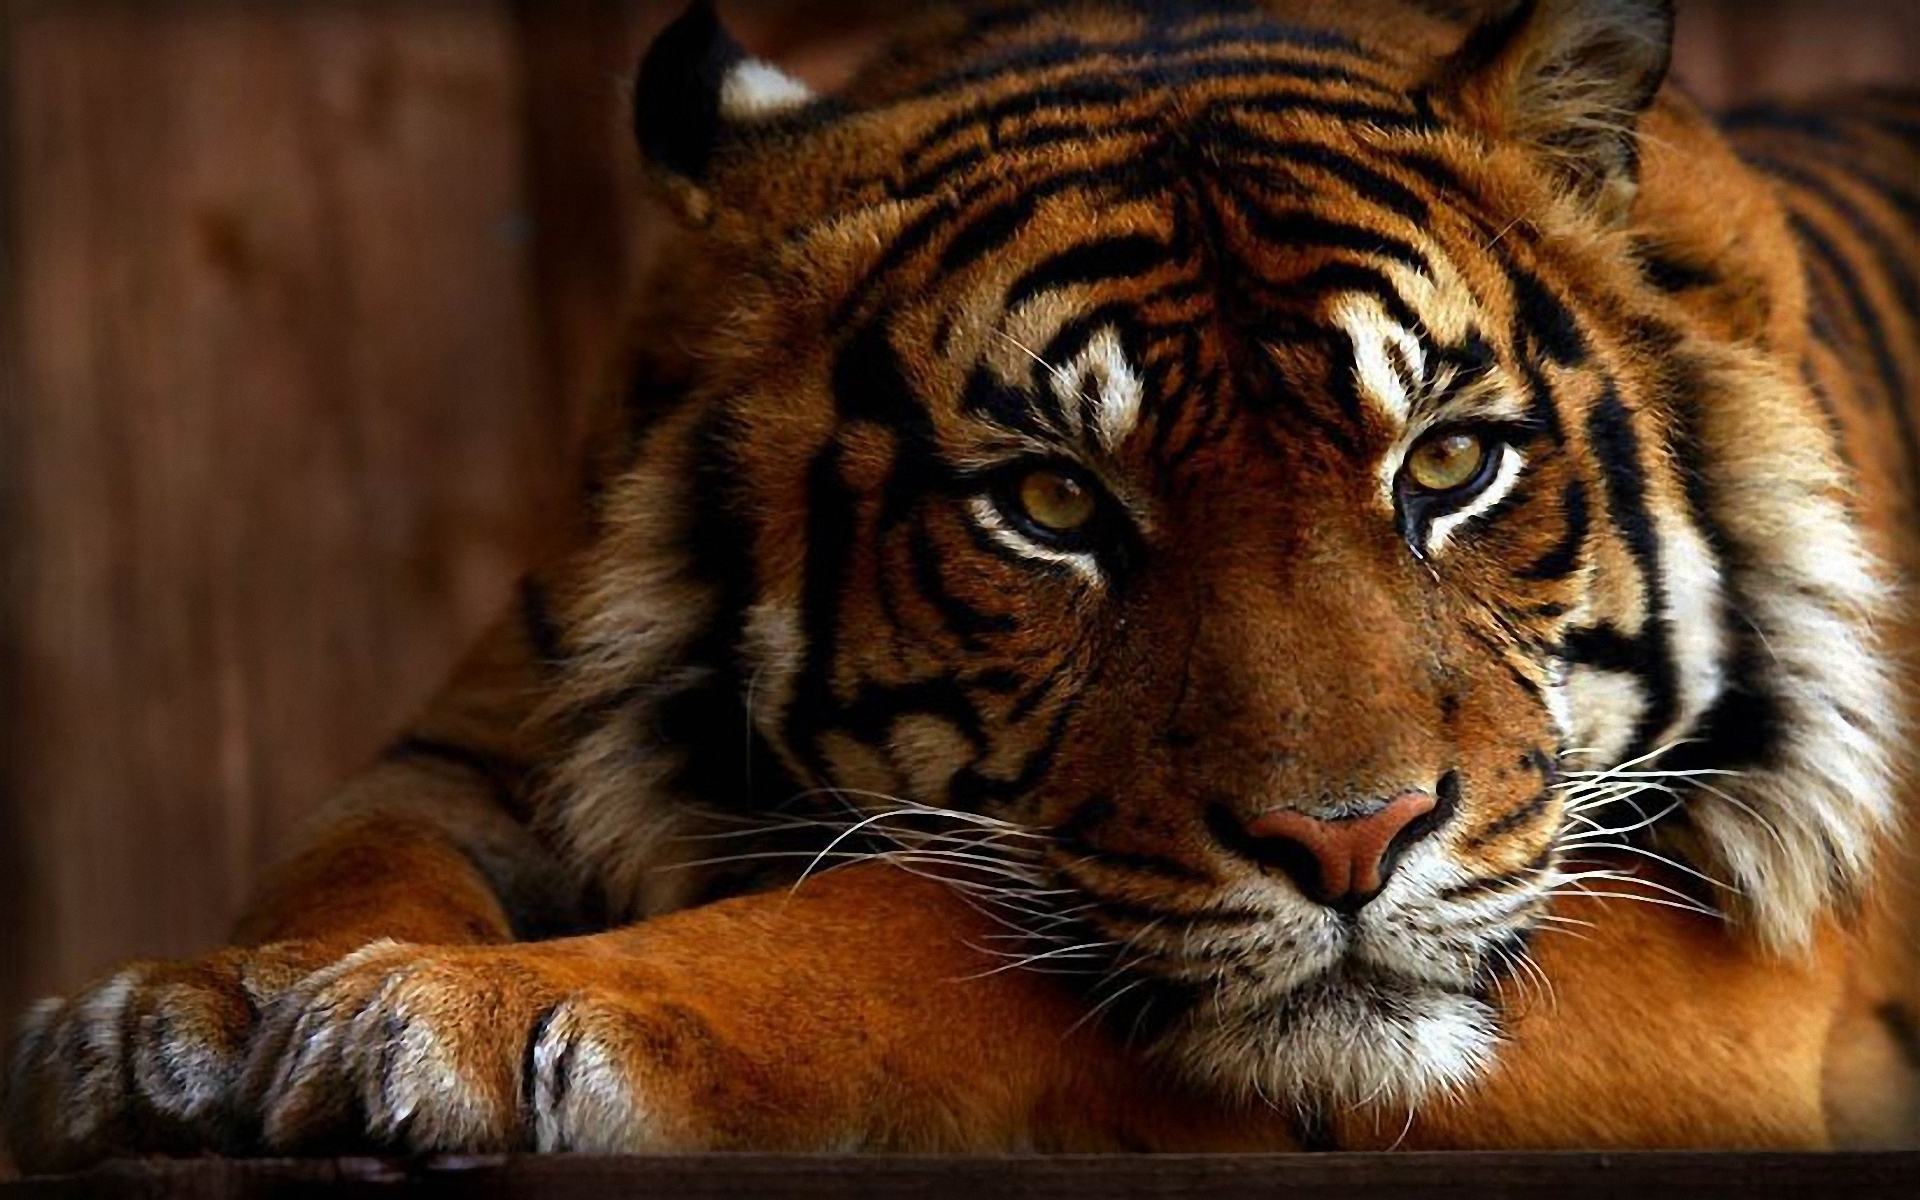 Tiger wallpapers and images - wallpapers, pictures, photos